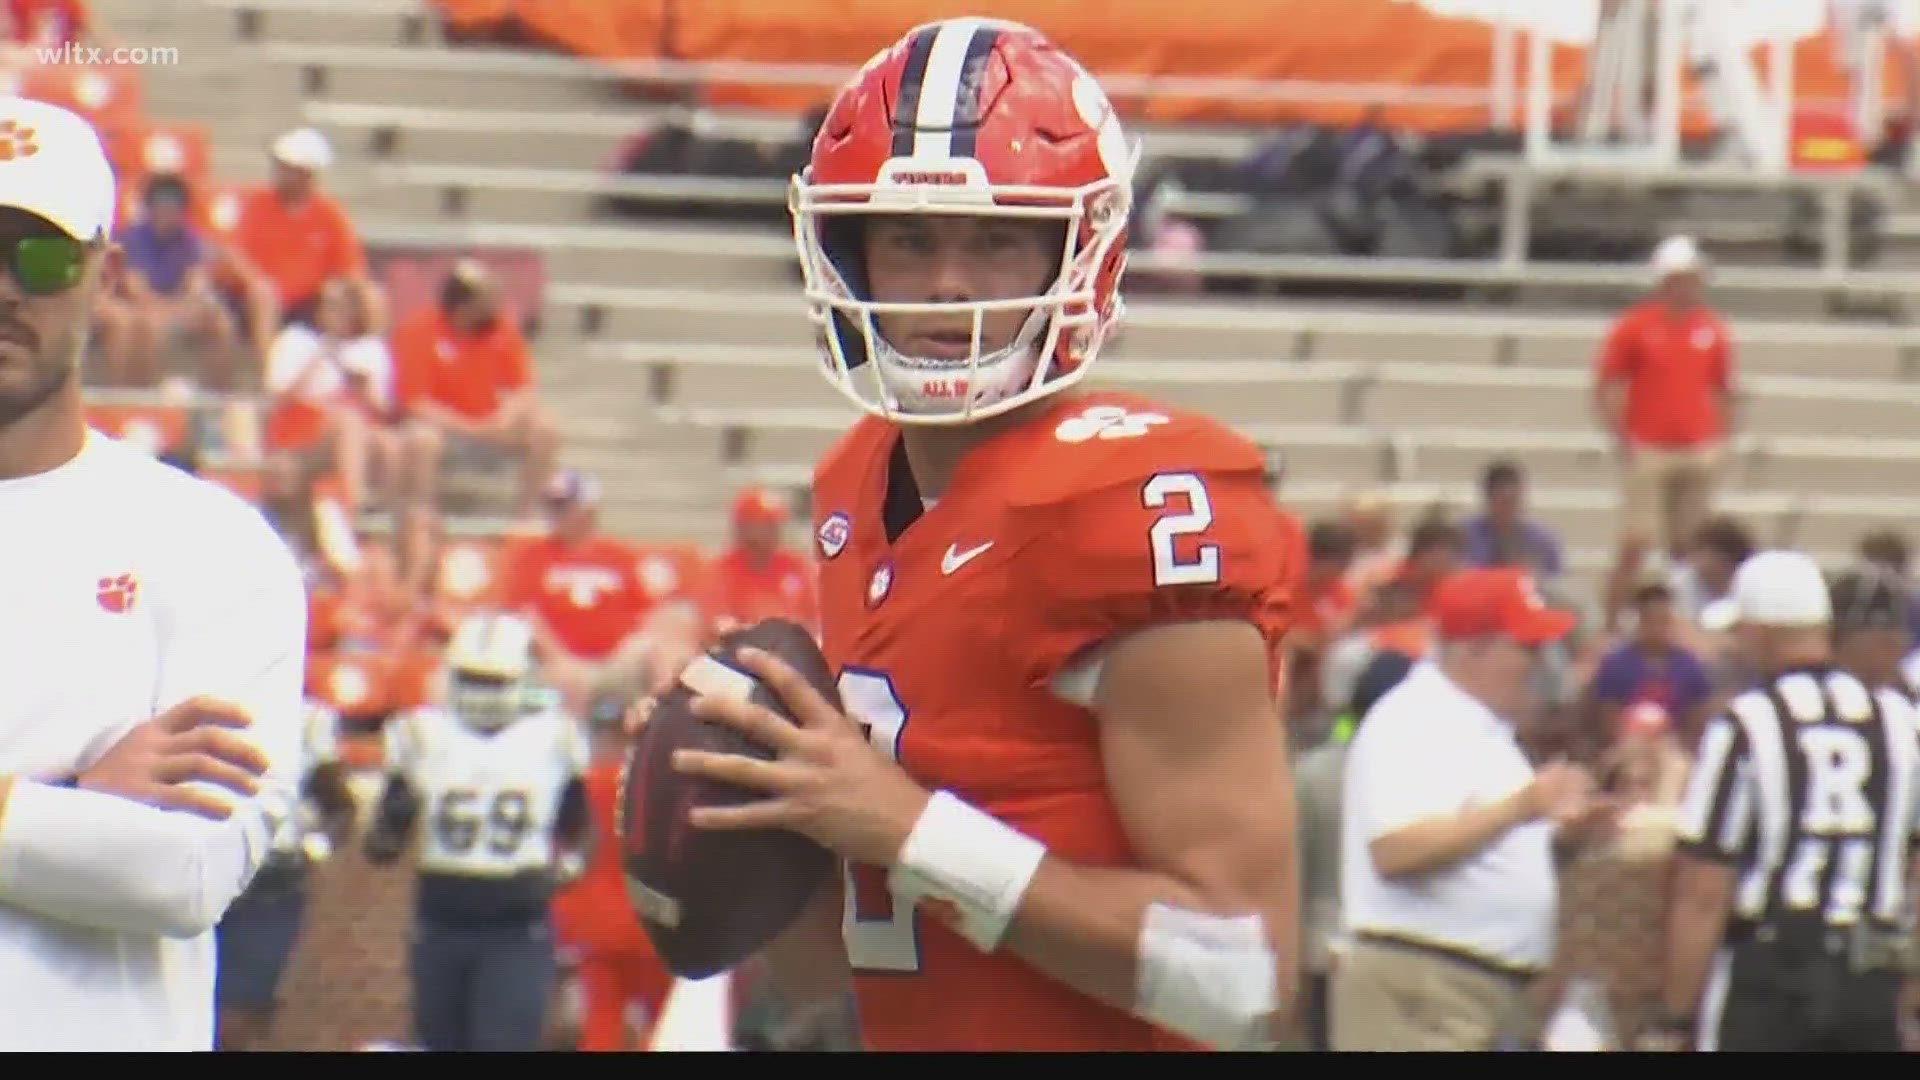 At his Tuesday news conference, Clemson head coach Dabo Swinney was asked to break down his starting quarterback's ability to make quality reads in a timely fashion.